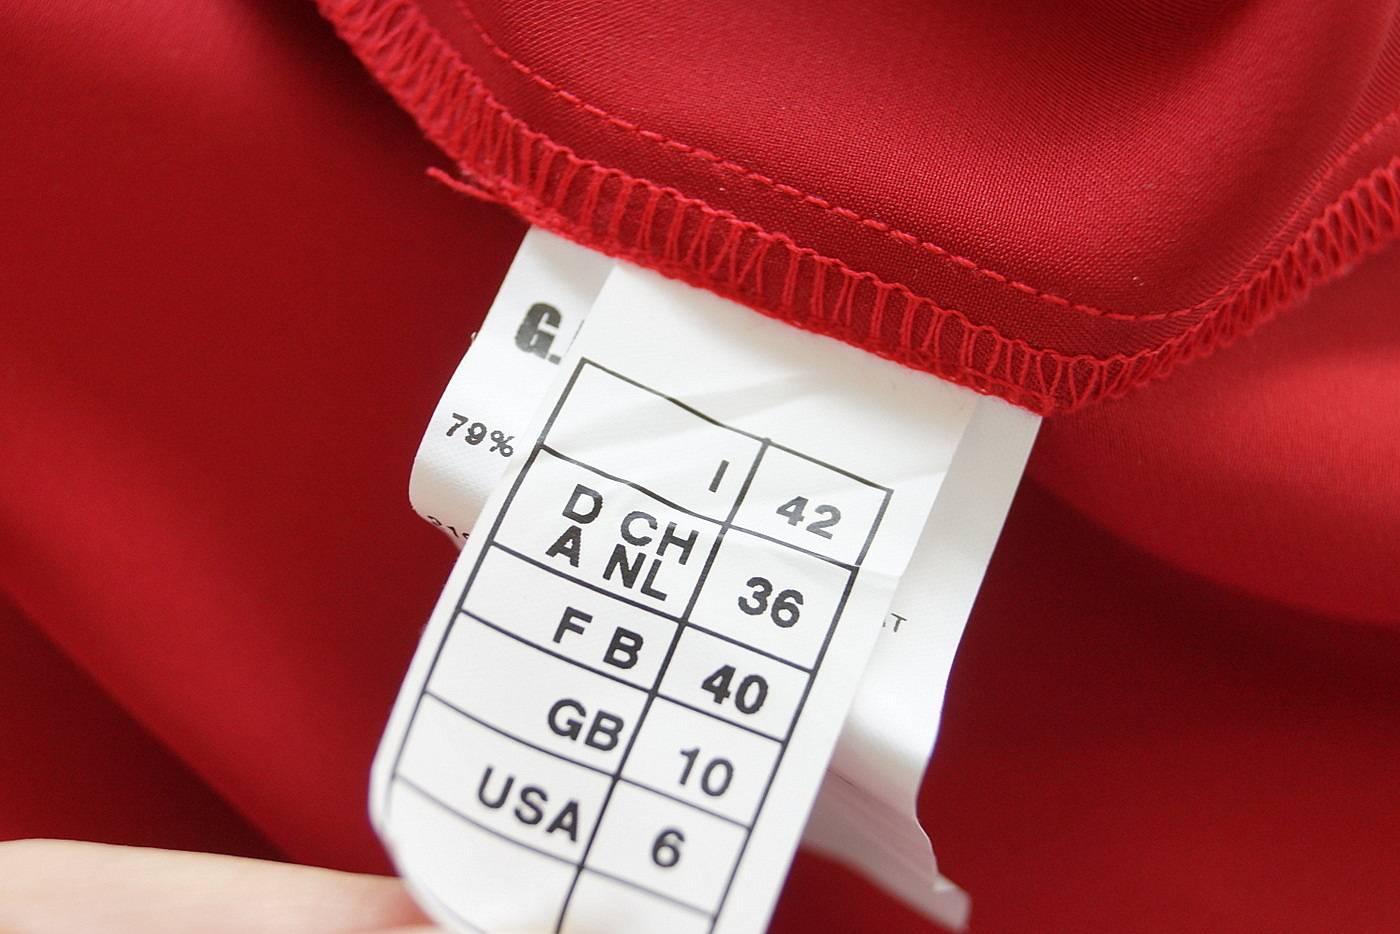 Gianfranco Ferre Top Jewel Chinese Red Blouse Unique Buttons 42 / 6 2